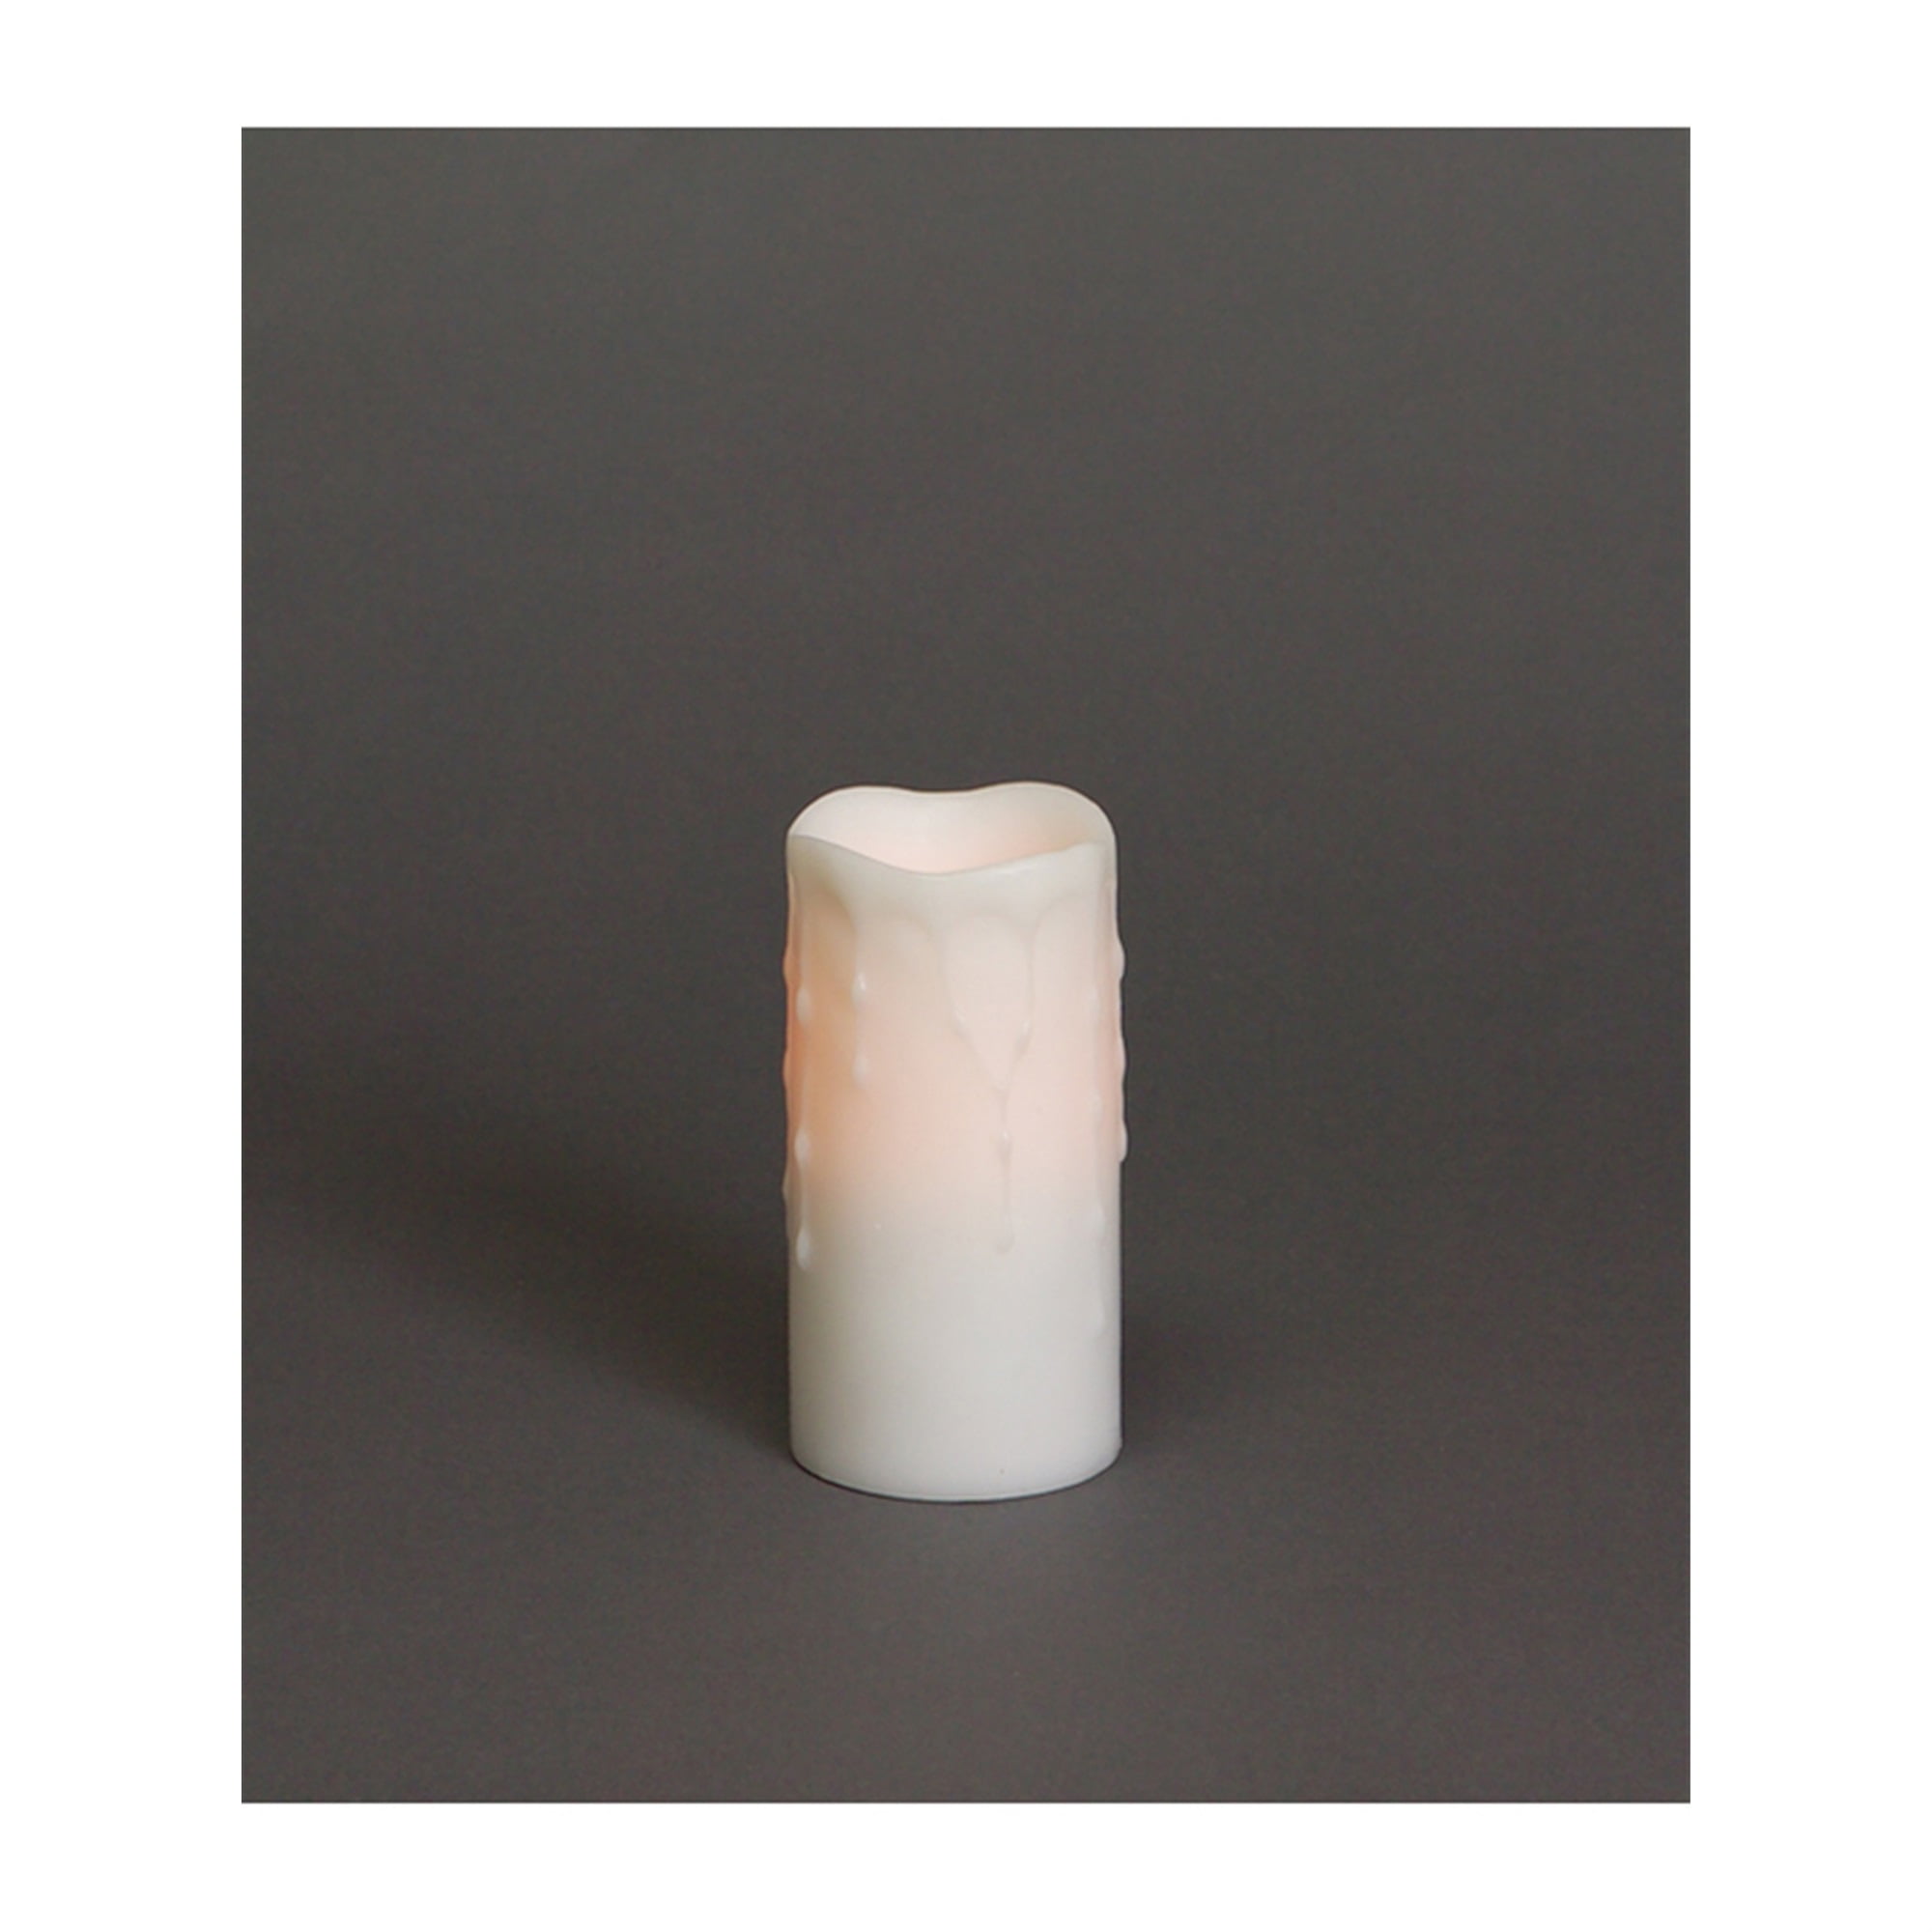 LED Wax Dripping Pillar Candle (Set of 4) 3"Dx6"H Wax/Plastic - 2 C Batteries Not Incld